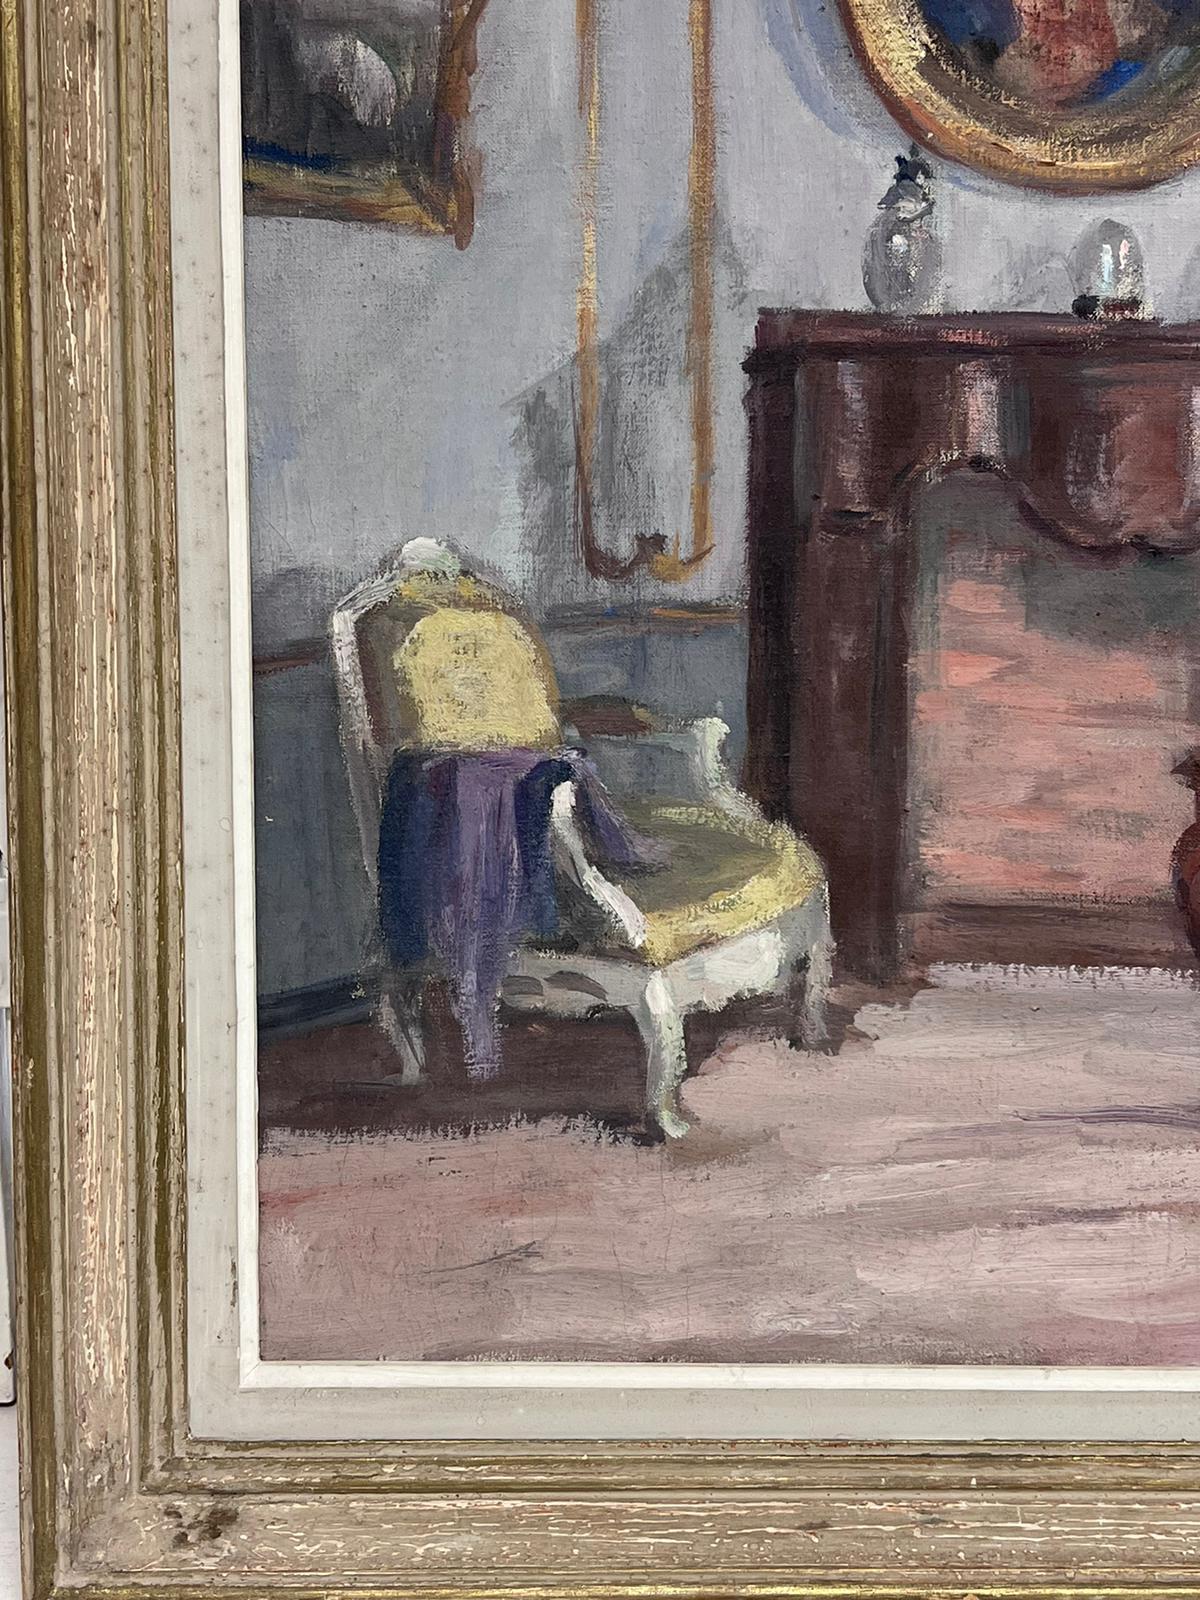 The Salon Interior
French Impressionist artist, circa 1930's
oil on canvas, framed
framed: 26 x 22 inches
canvas: 22.5 x 18 inches
provenance: private collection, France
condition: very good and sound condition